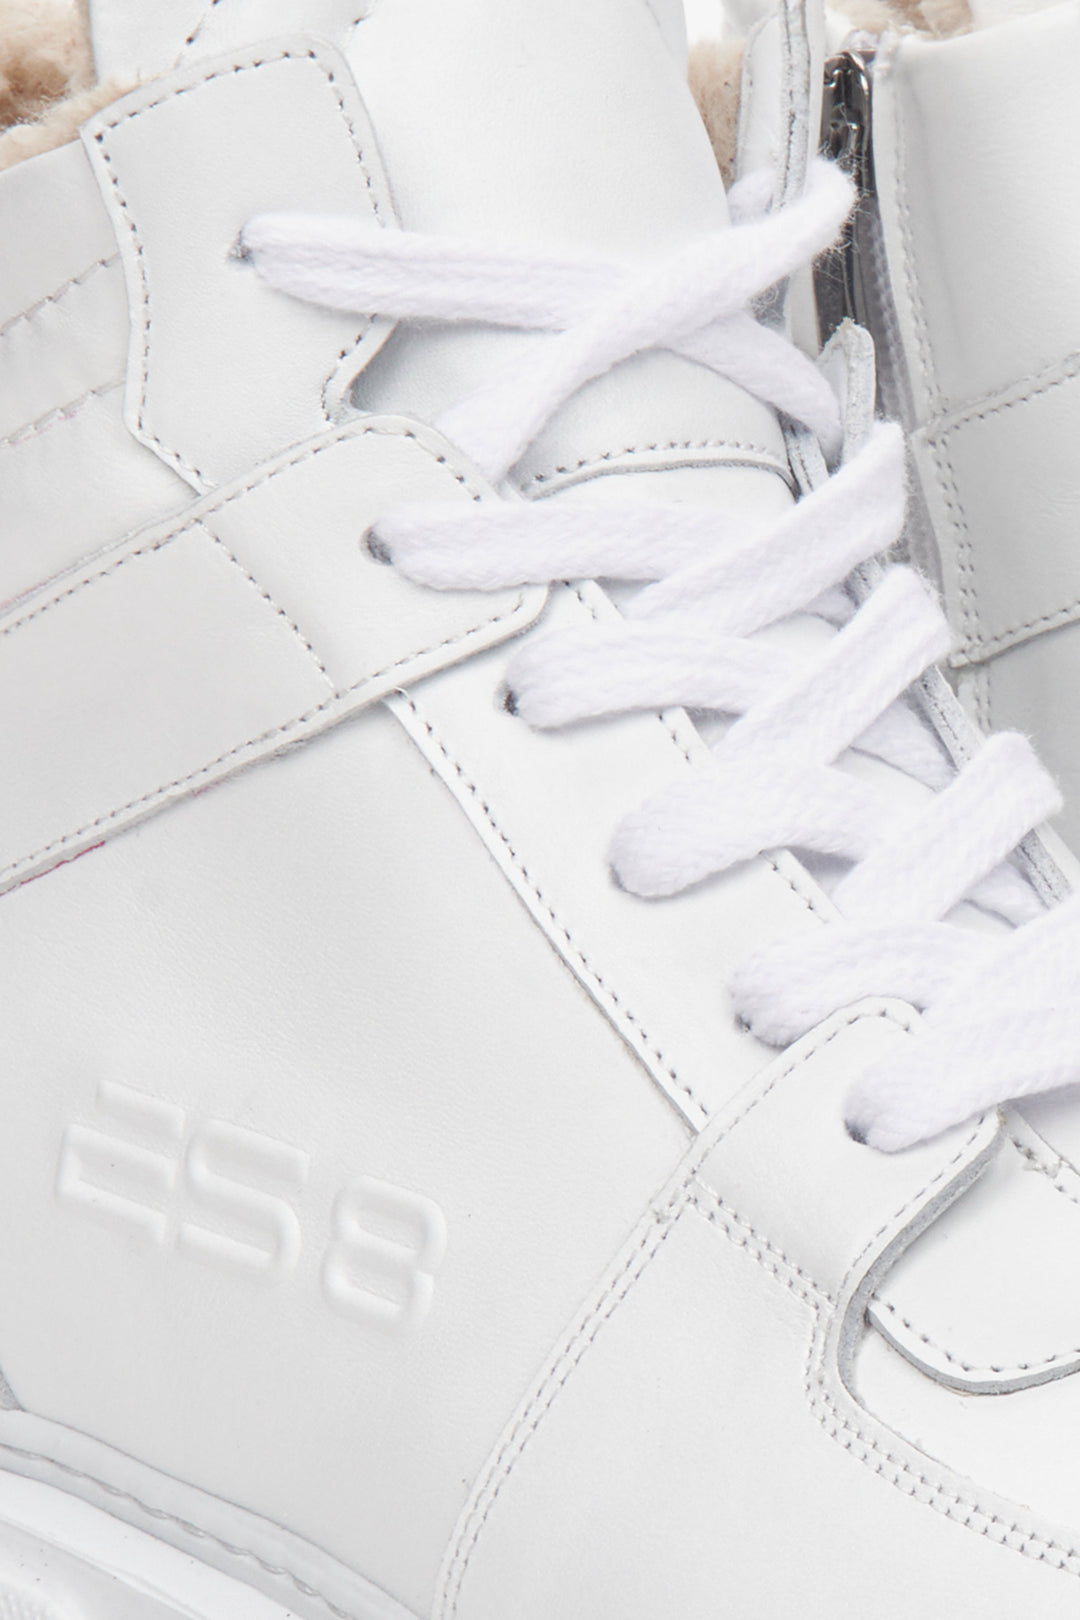 High-top white suede and leather women's sneakers by Estro - close-up on the interior of the model.